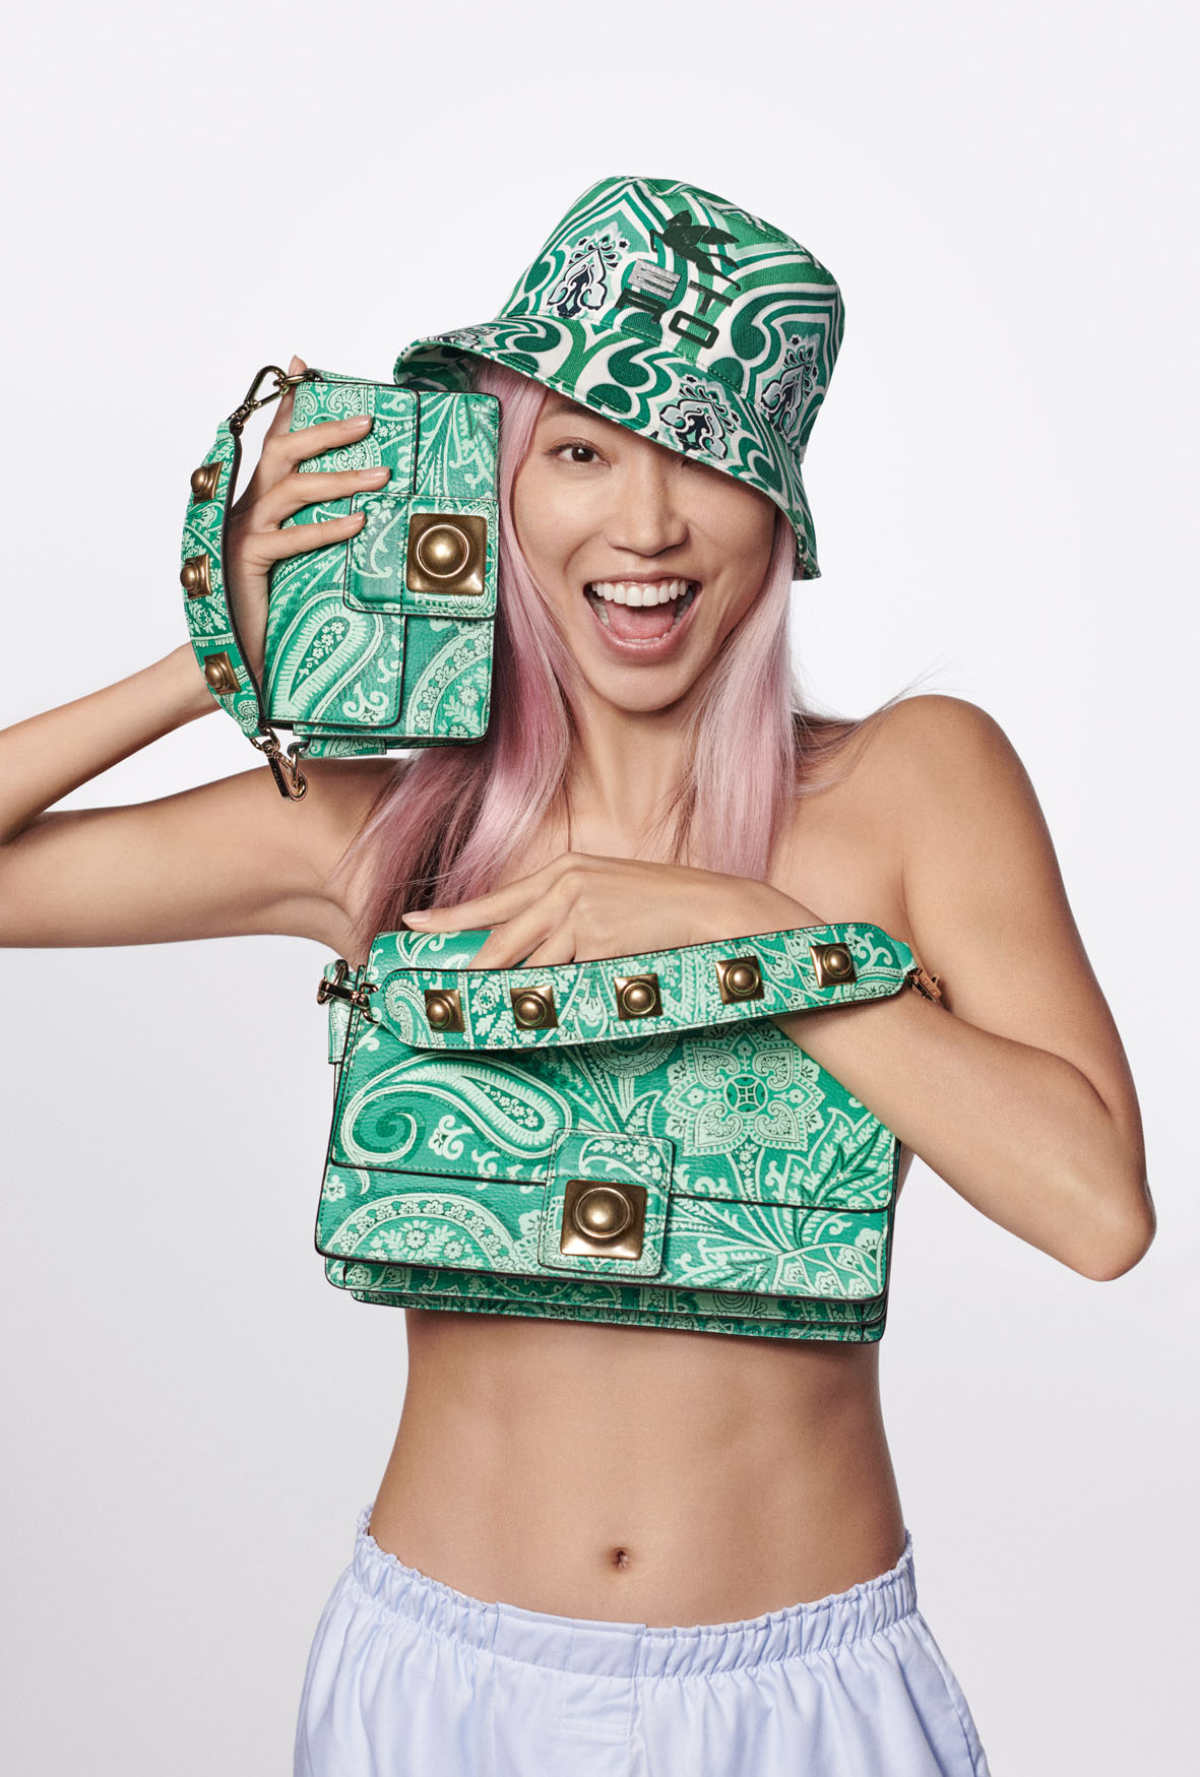 Etro Launched The New Crown Me Flap Bag